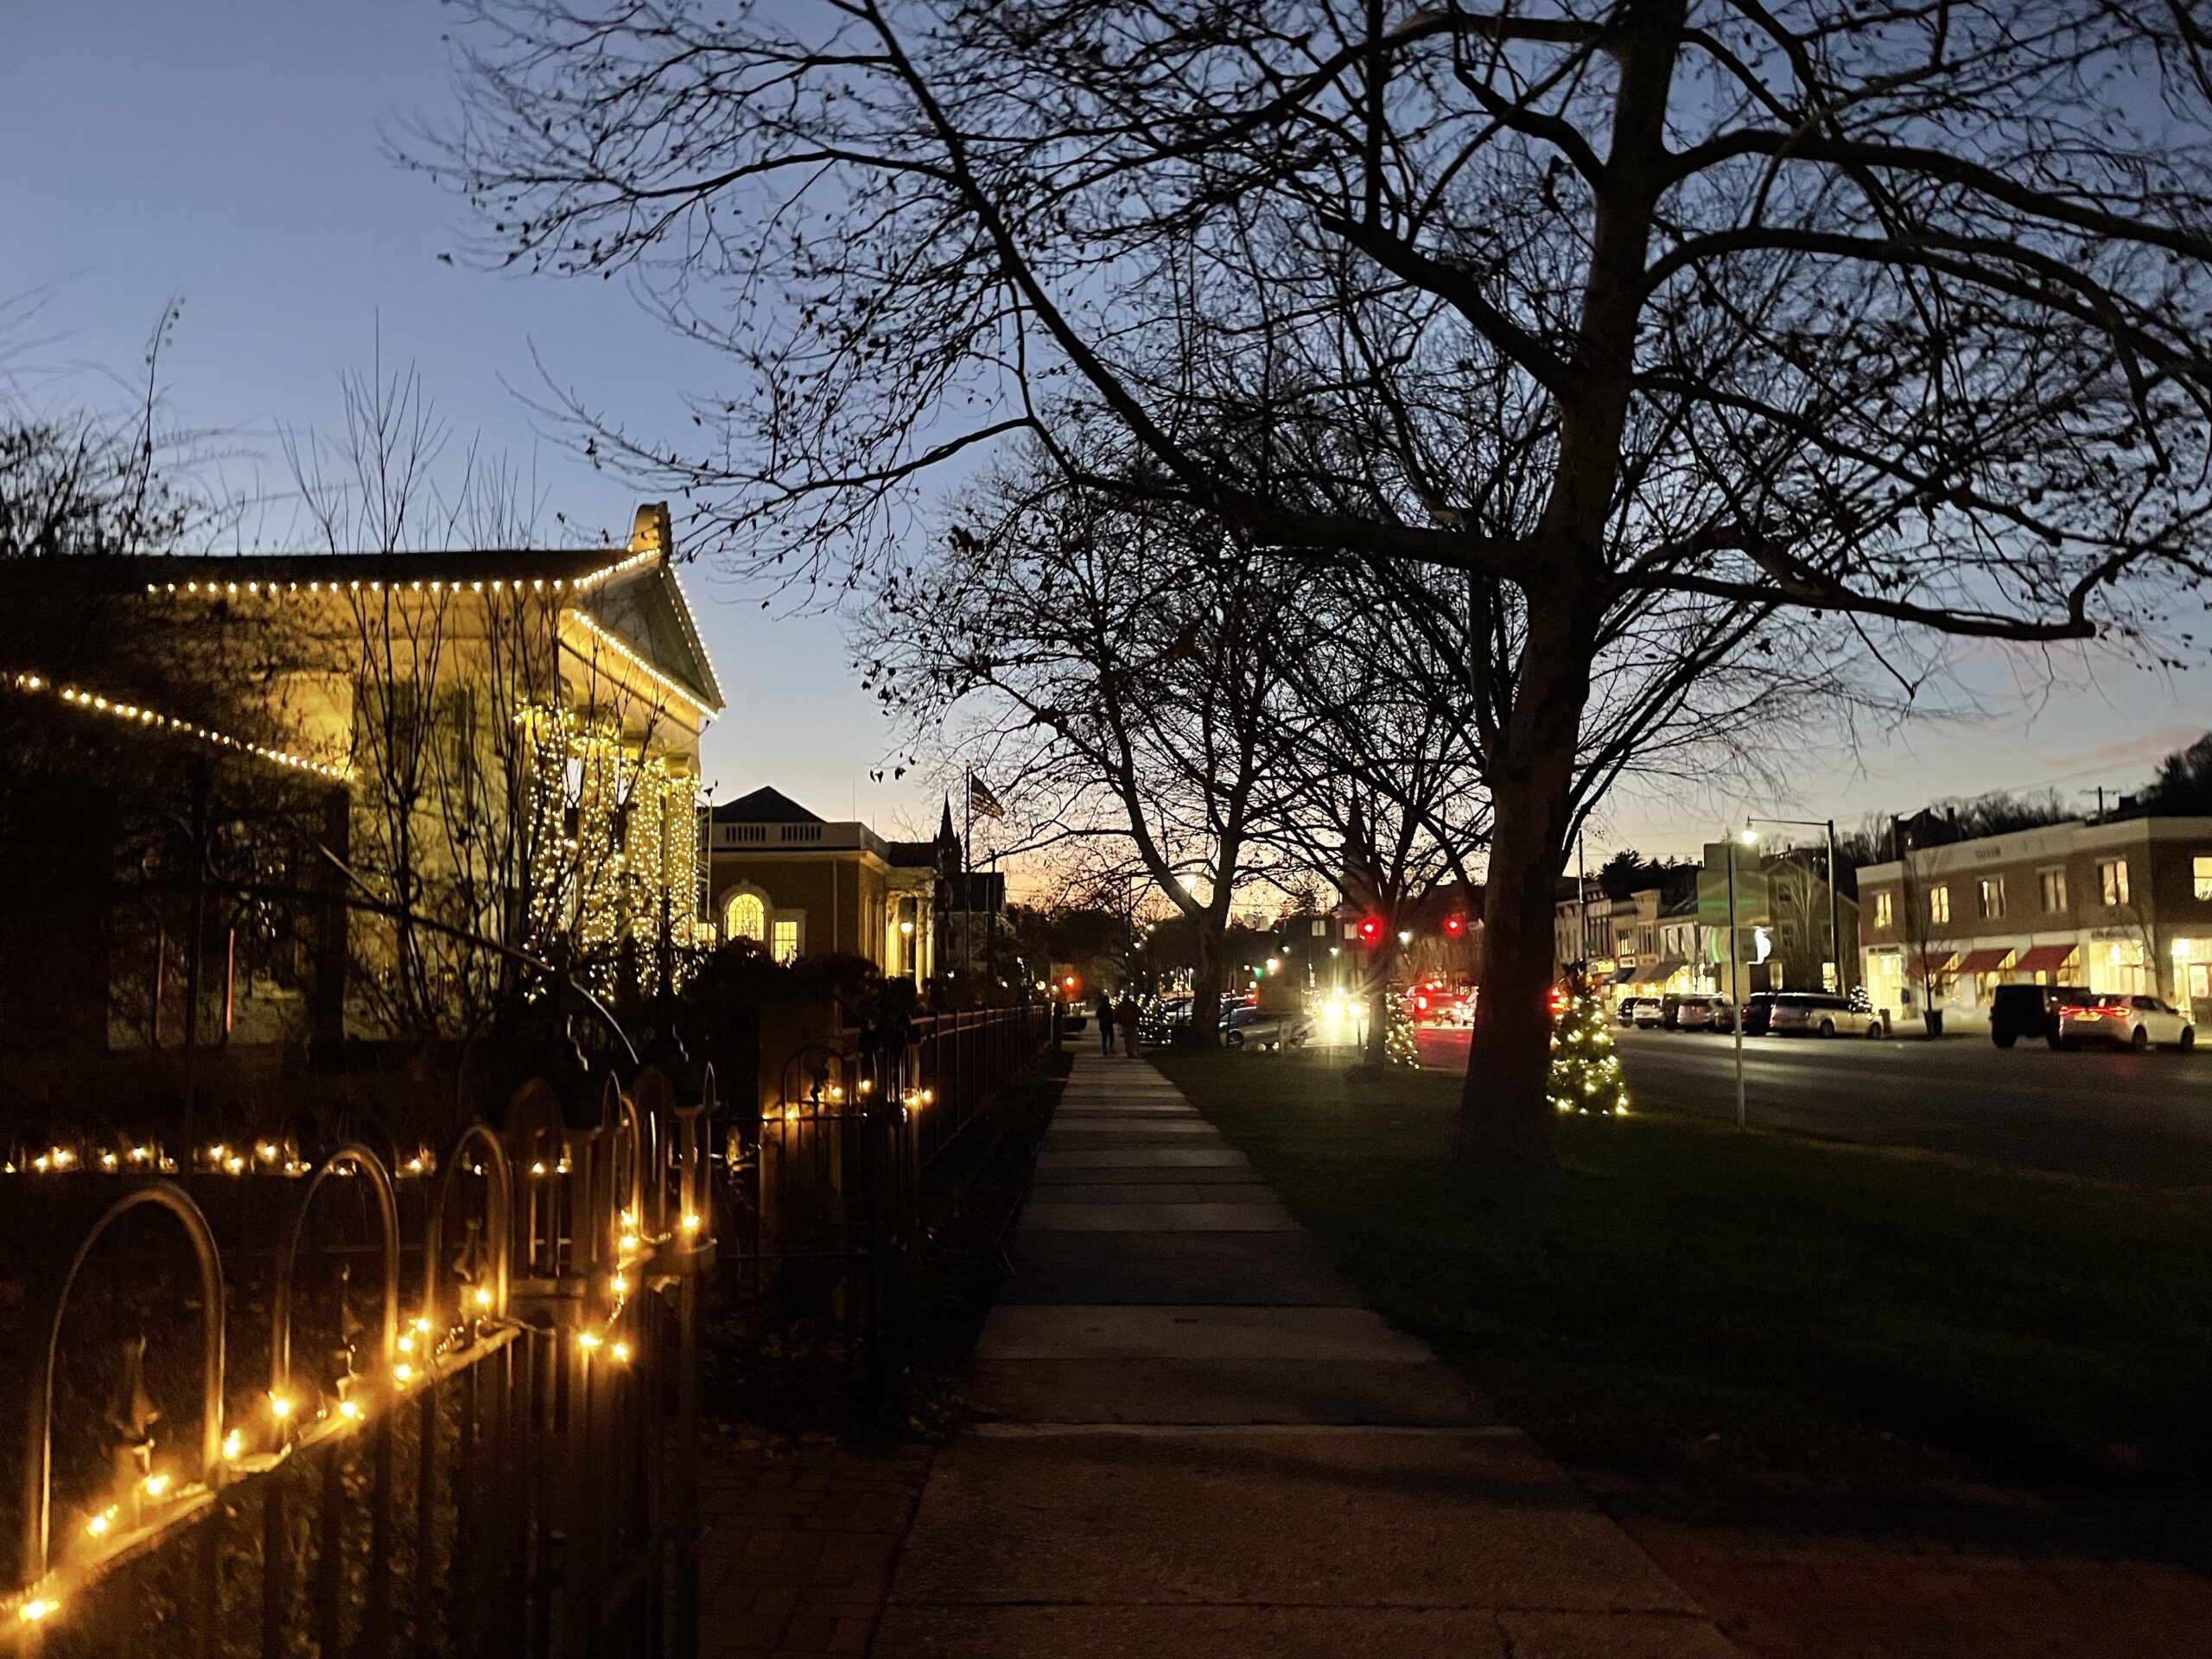 Granville's Candlelight Walking Tour returns this Saturday The